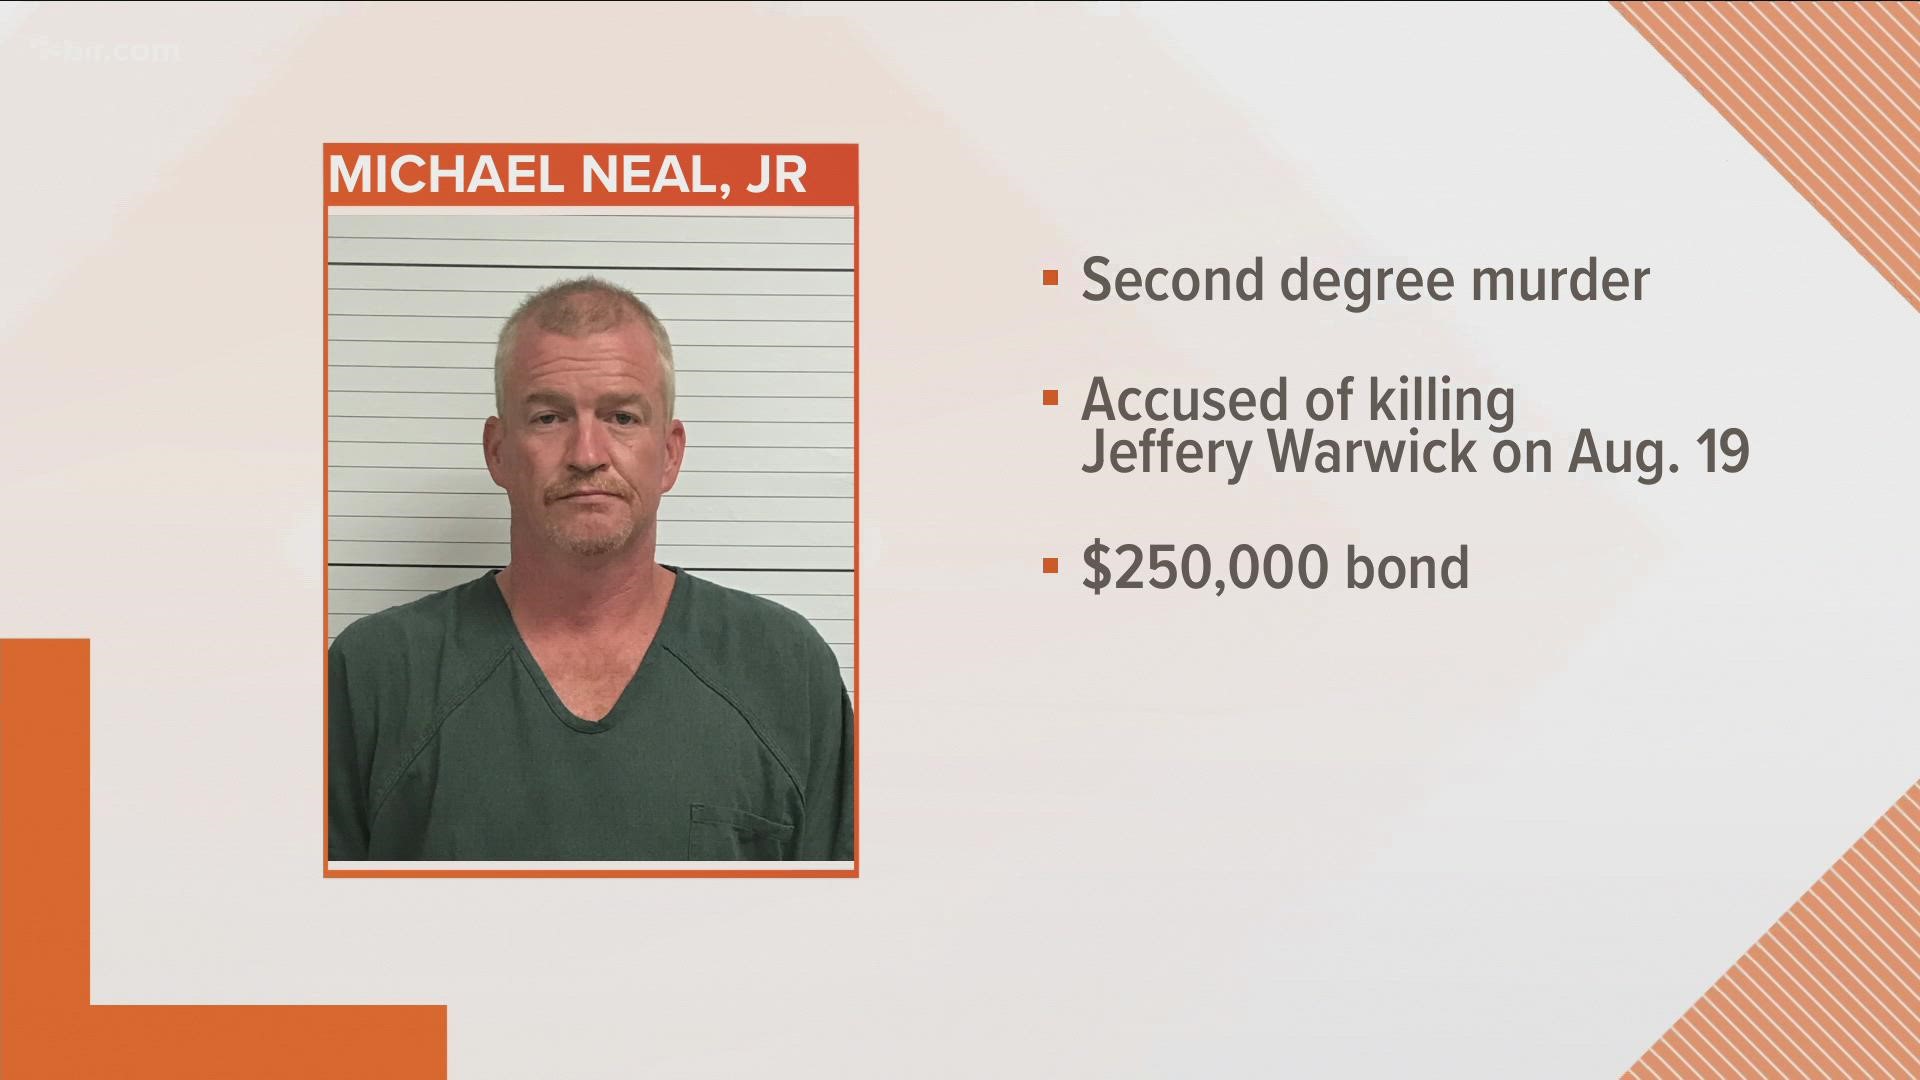 Agents said they identified Michael Neal Jr. as the suspect in the August shooting death of Jeffery Warwick.